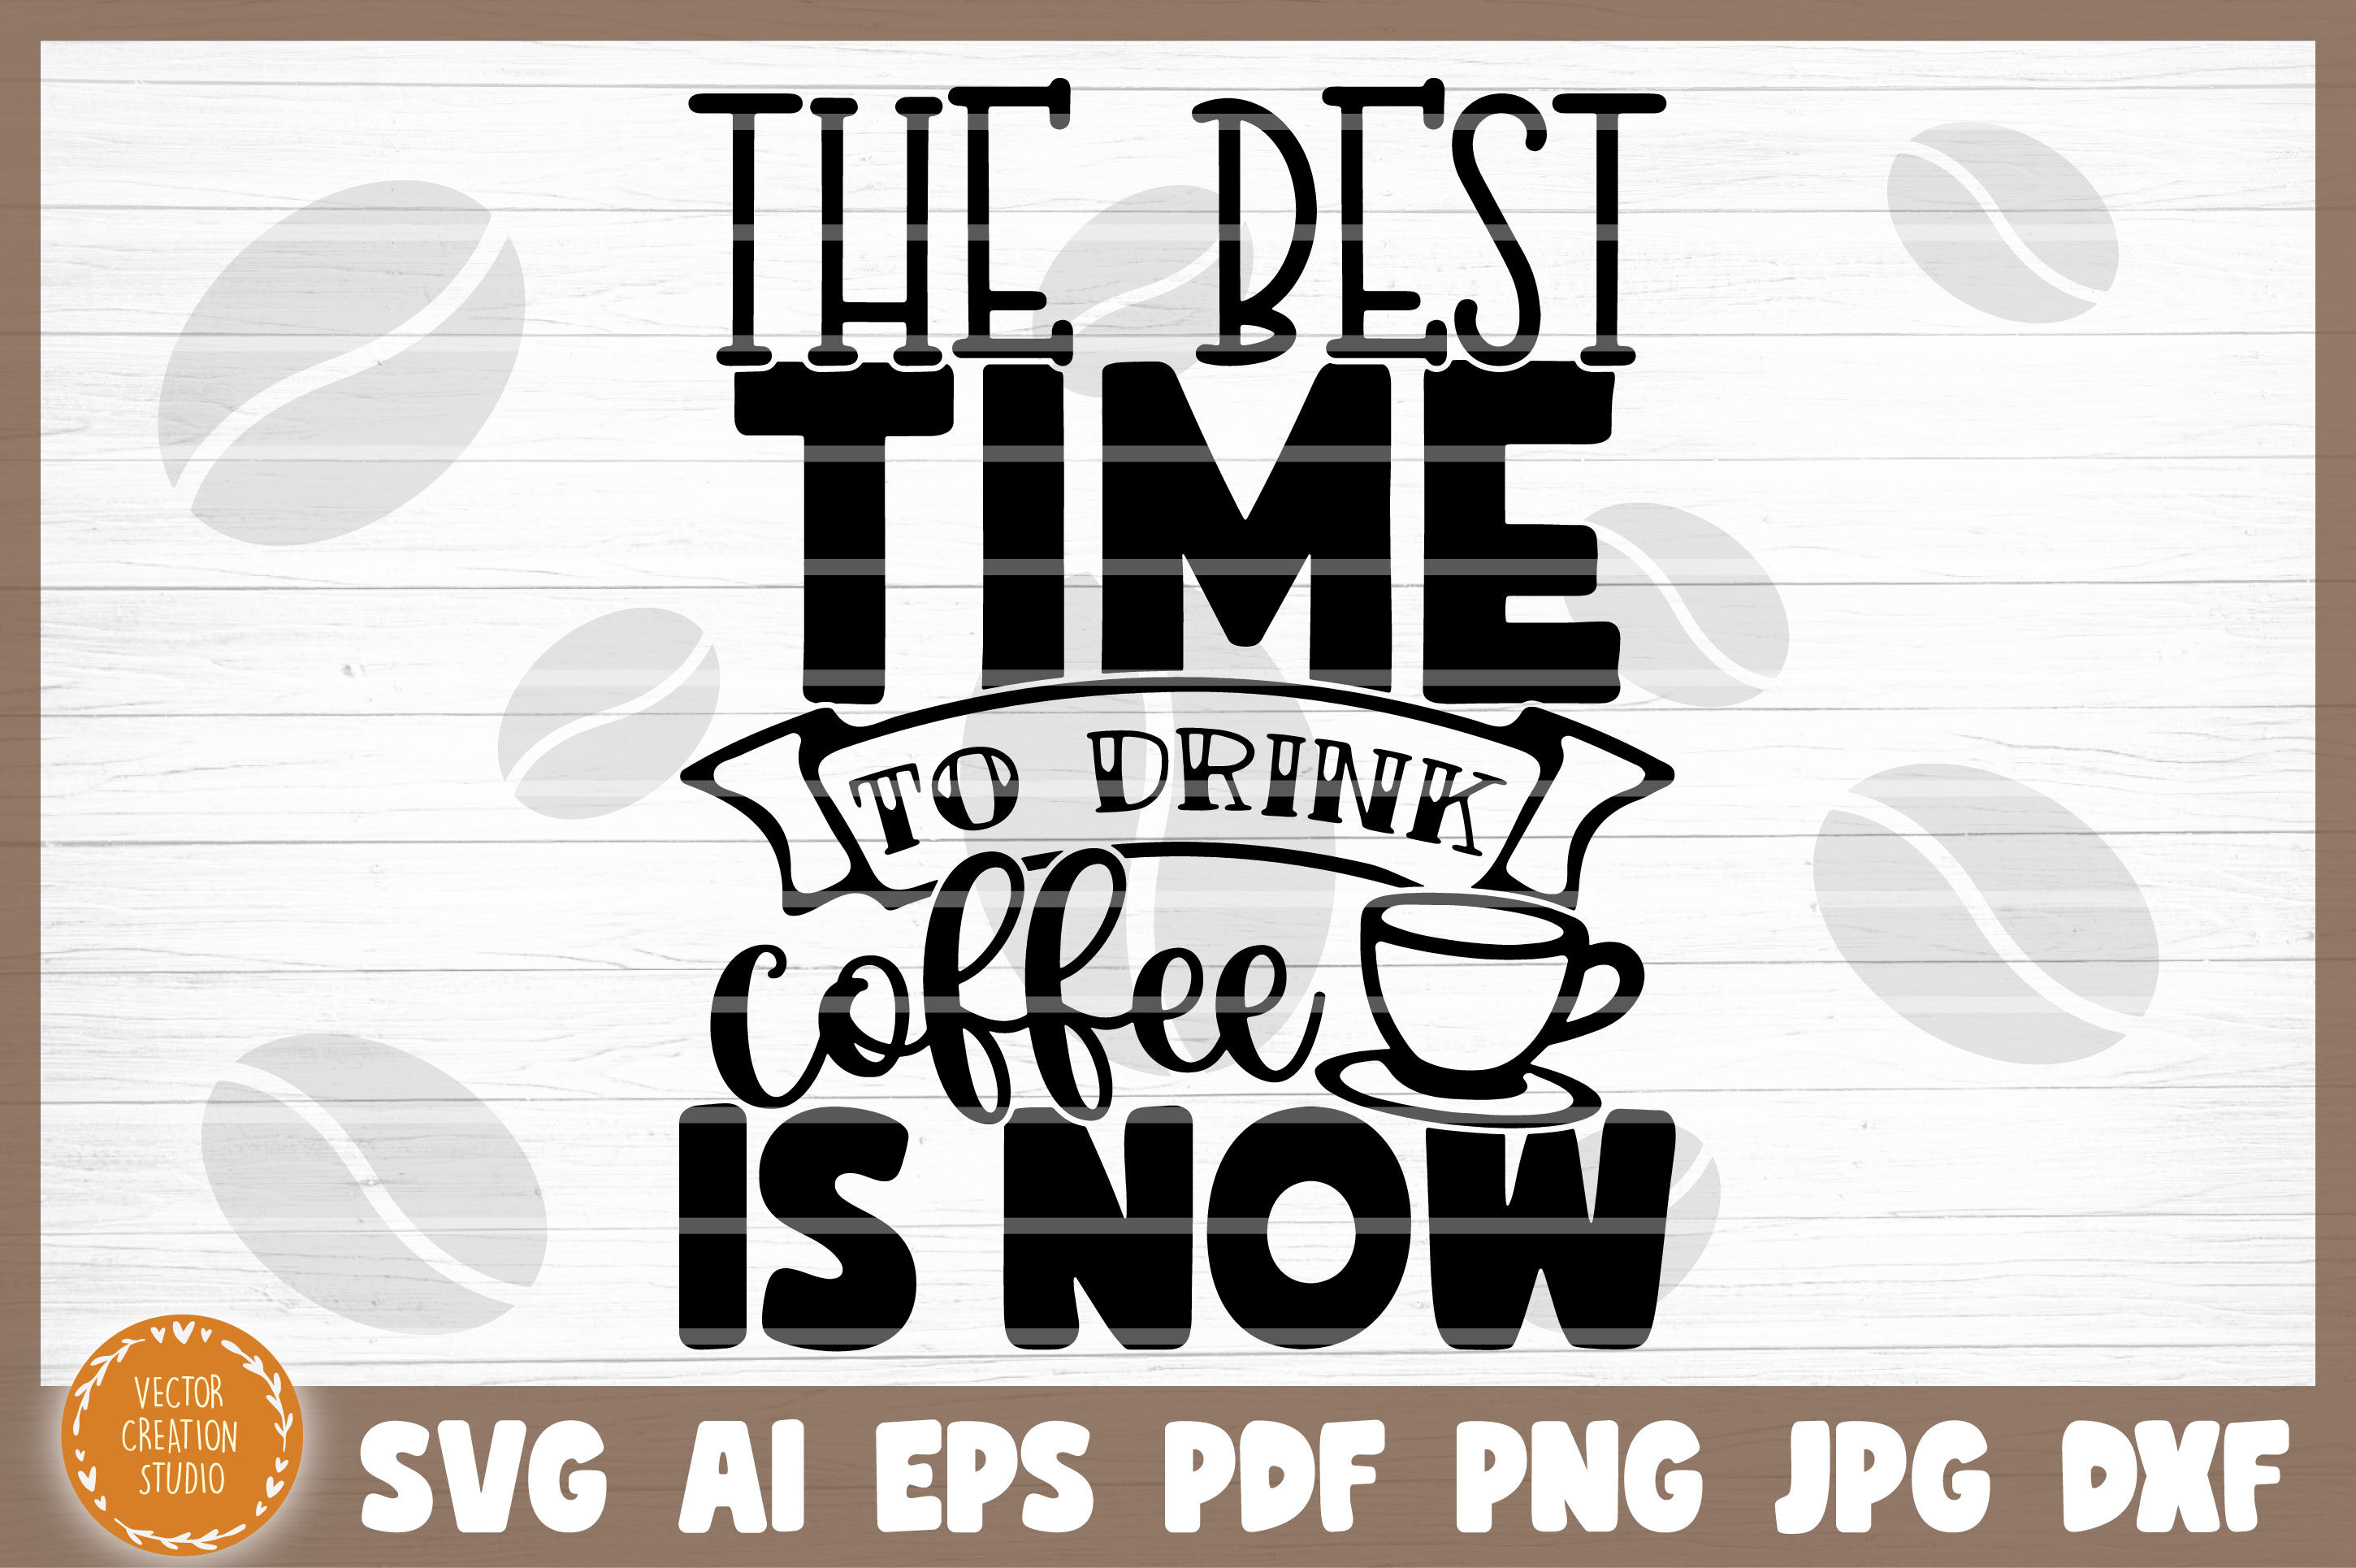 Download The Best Time To Drink Coffee Is Now Svg Cut File By Vectorcreationstudio Thehungryjpeg Com